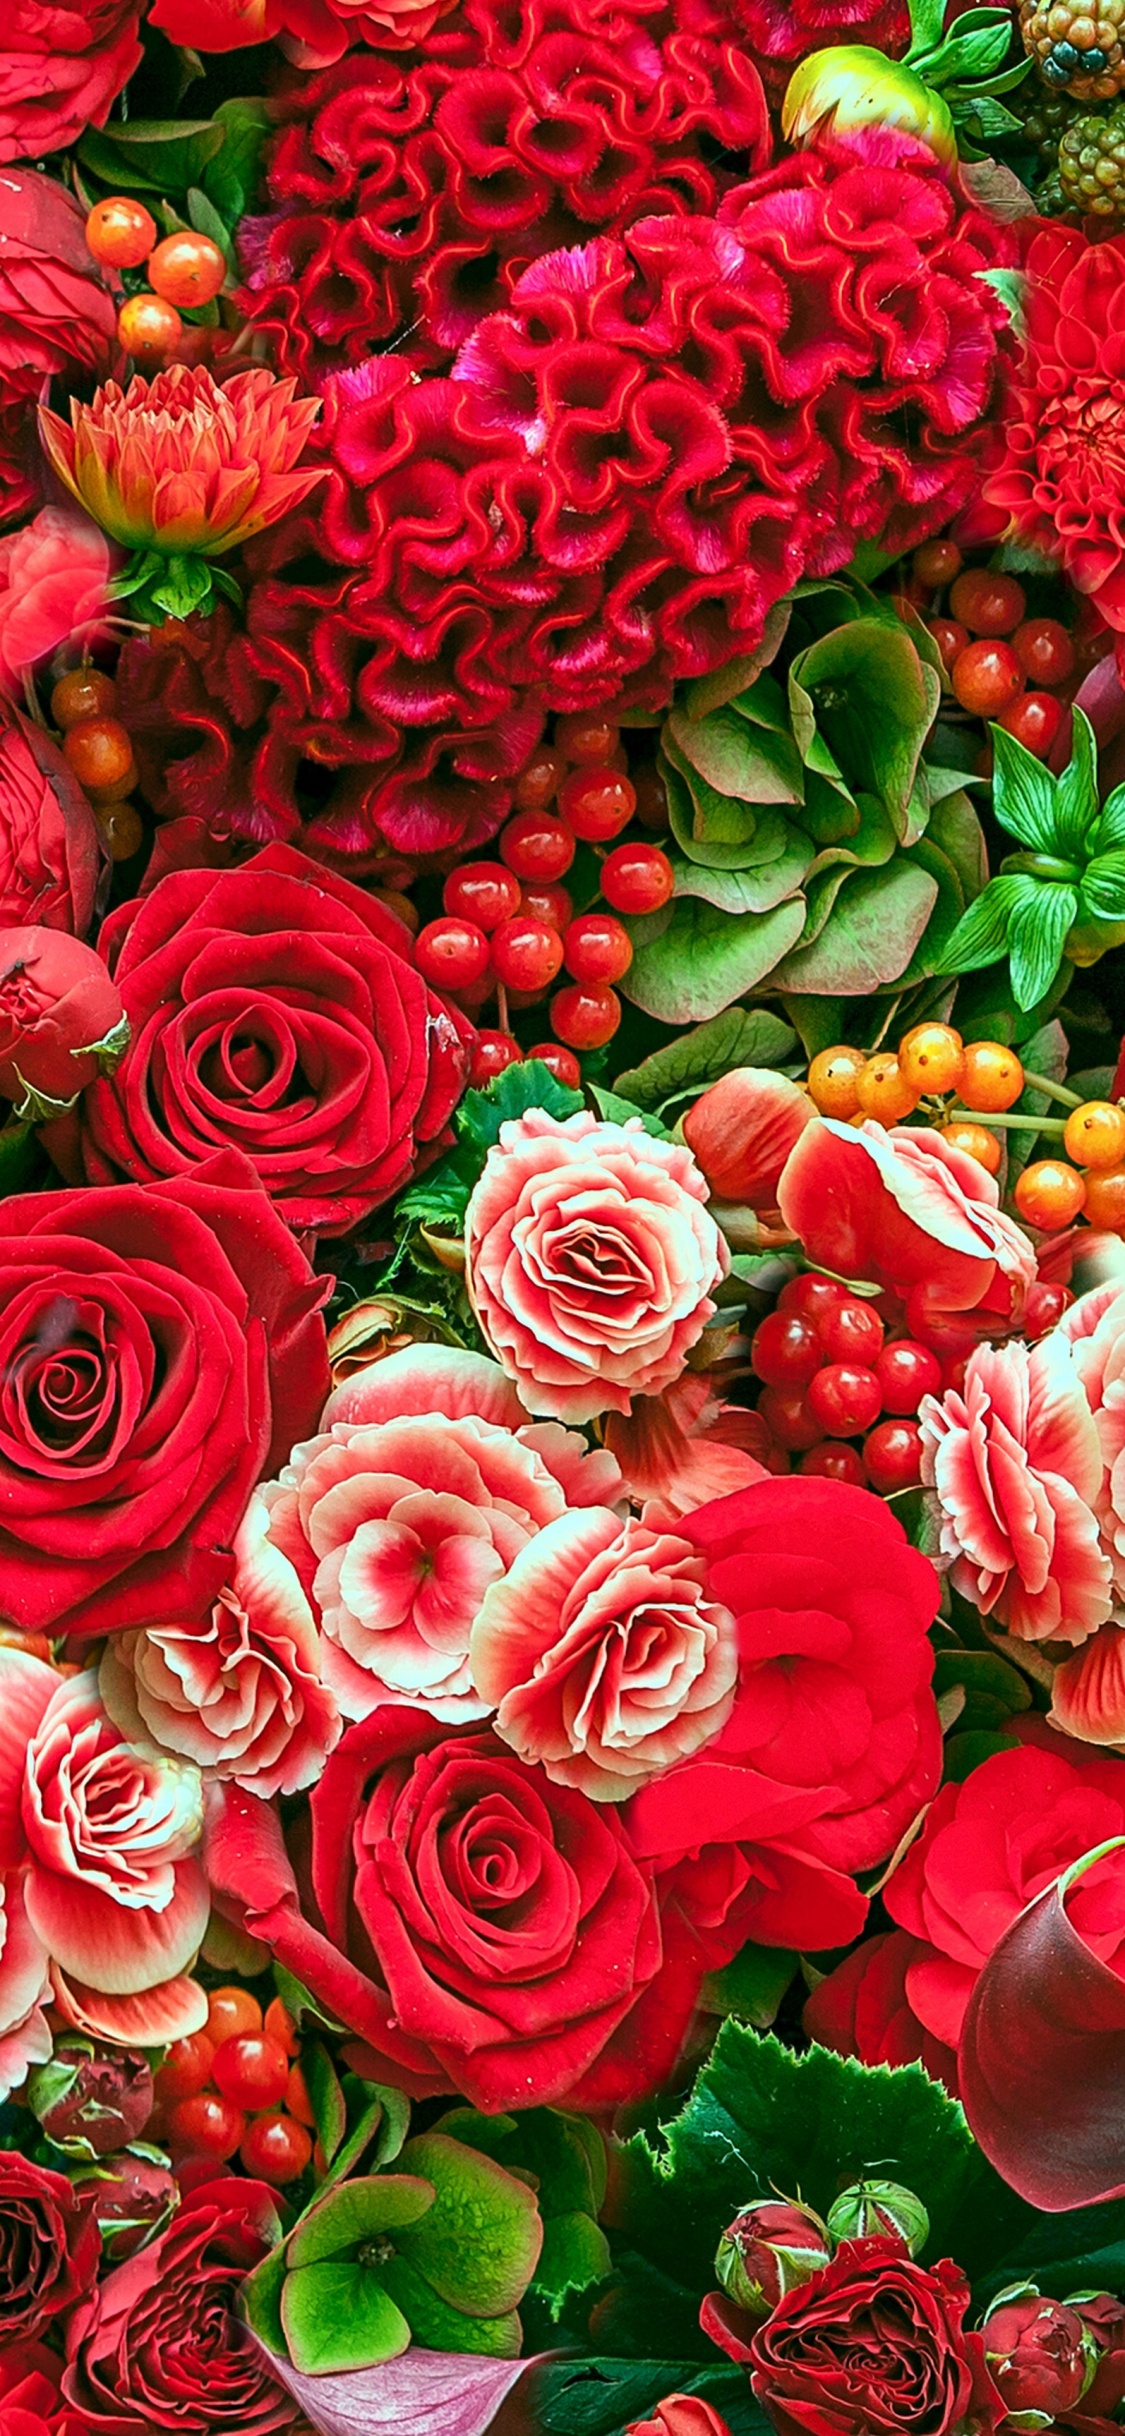 Red Roses With Green Leaves. Wallpaper in 1125x2436 Resolution